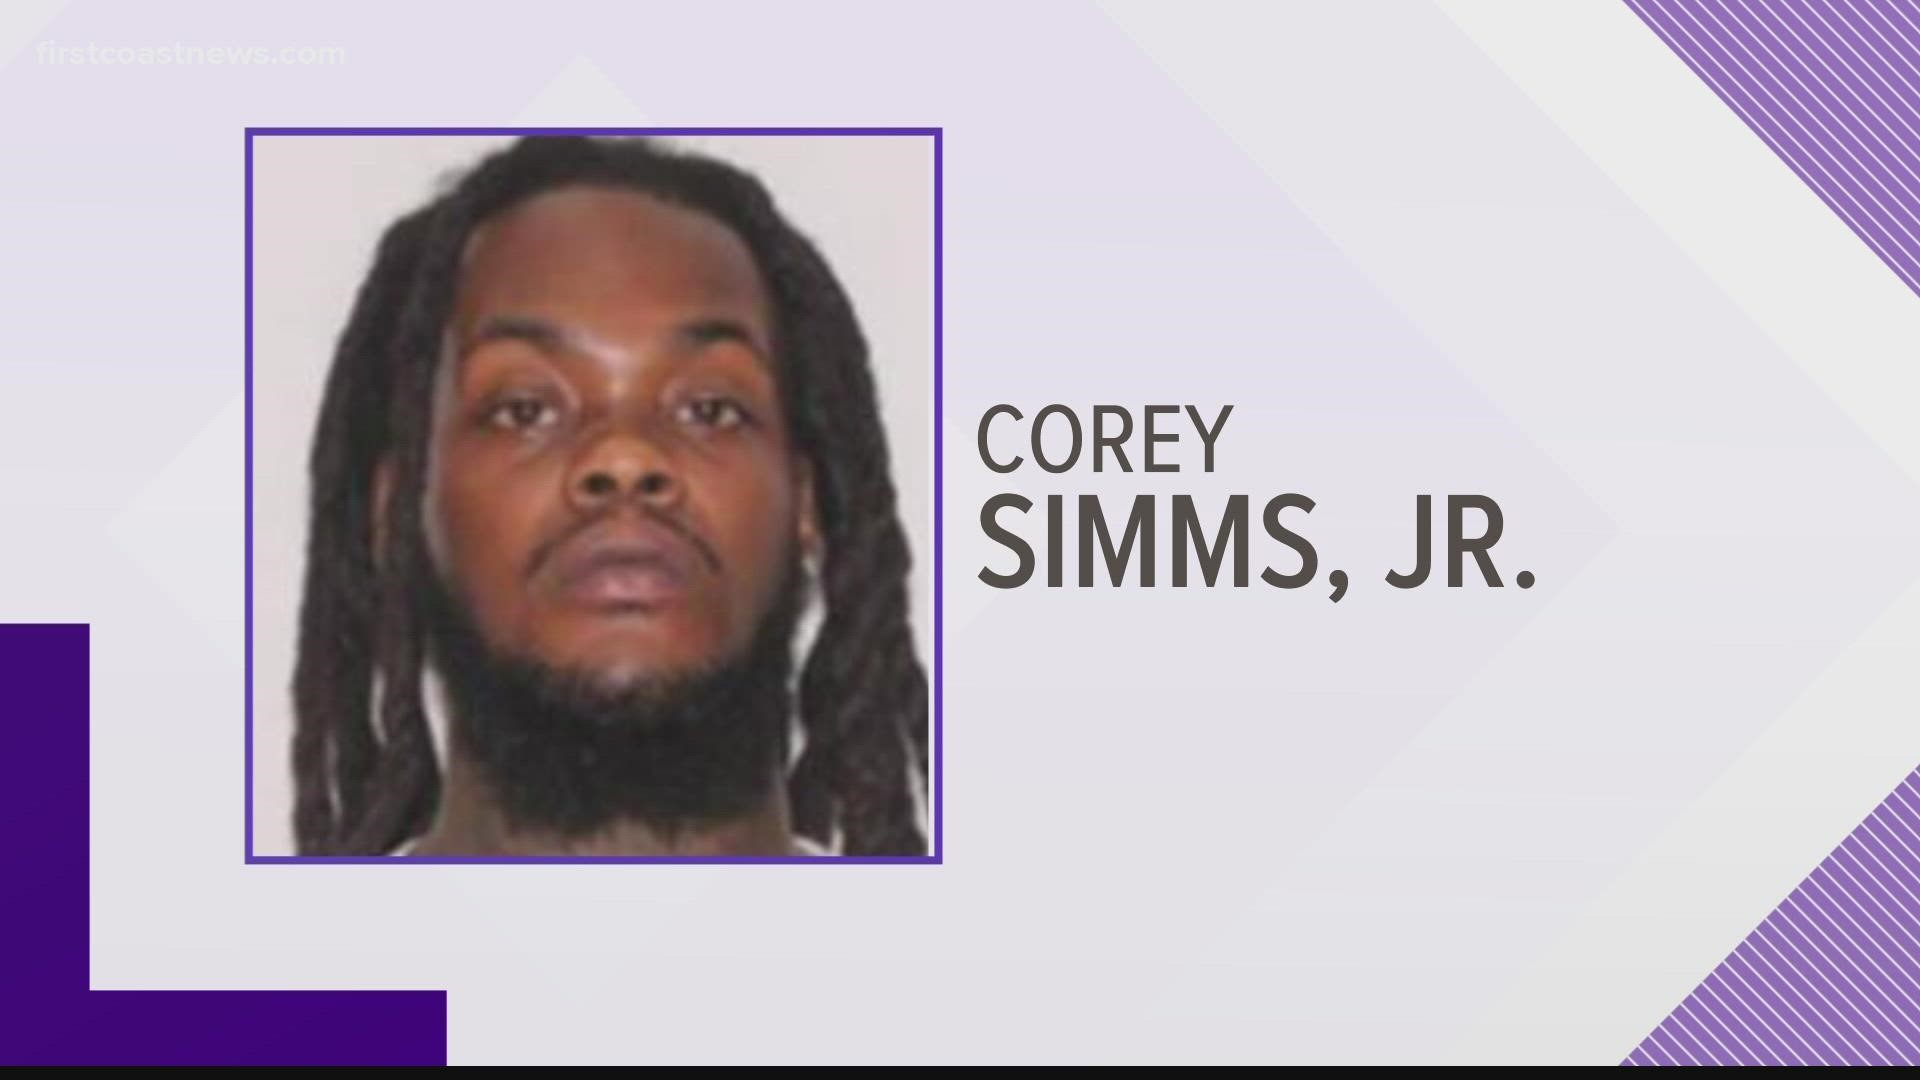 Corey Simms is charged with accessory after the fact in regards to the shooting. A second subject remains at-large.